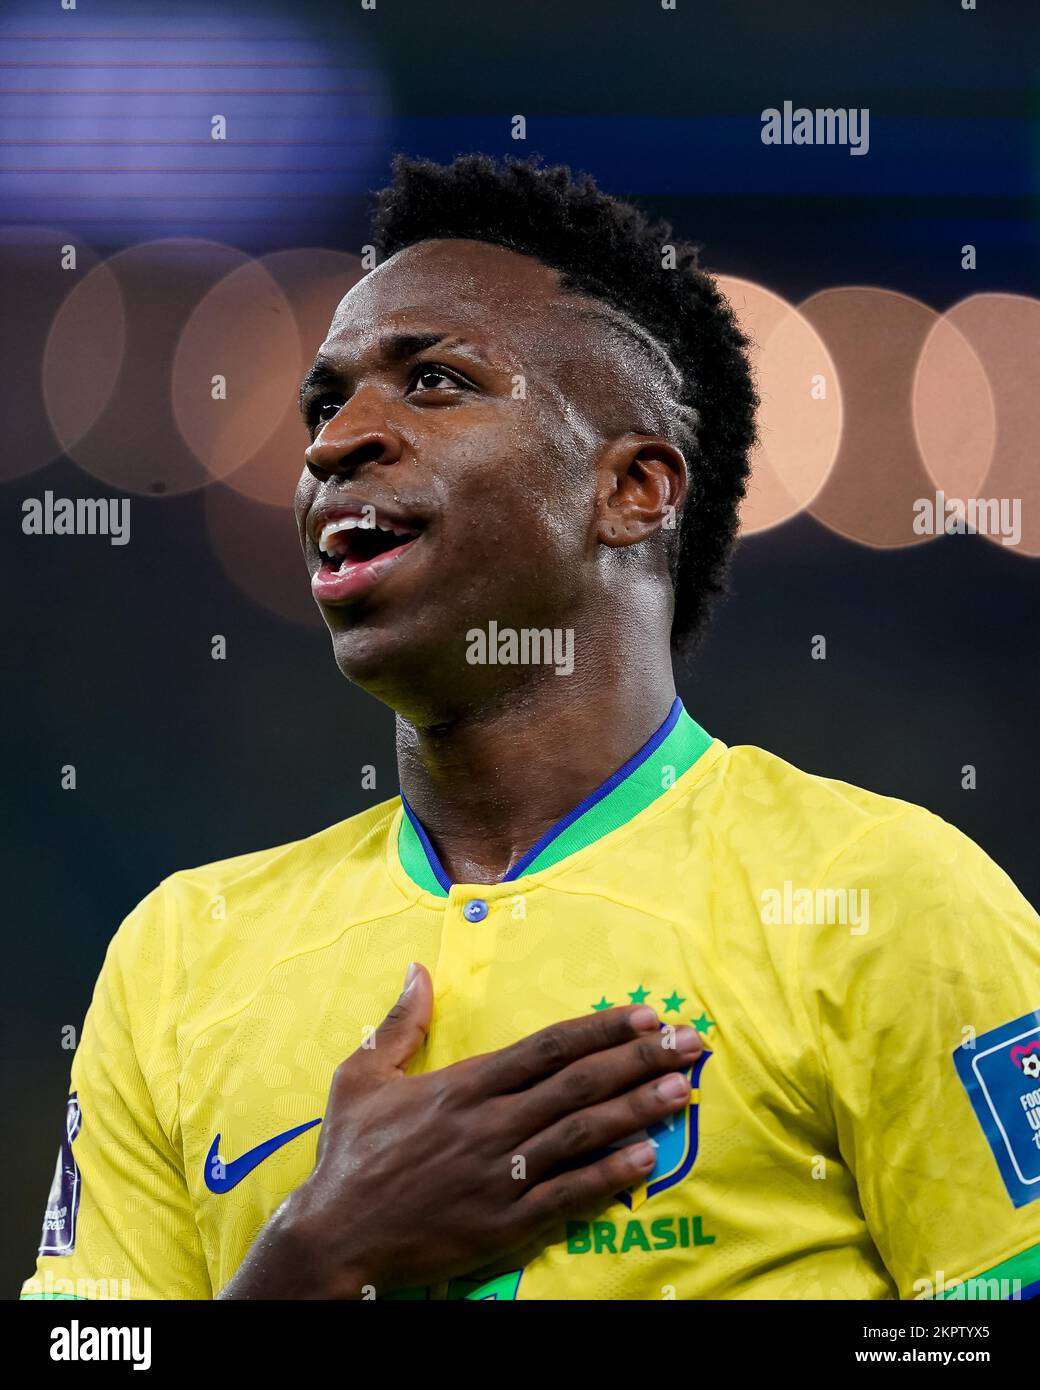 DOHA, QATAR - NOVEMBER 28: Player of Brazil Vinícius Júnior celebrates after scoring a disallowed goal during the FIFA World Cup Qatar 2022 group G match between Brazil and Switzerland at Stadium 974 on November 28, 2022 in Doha, Qatar. (Photo by Florencia Tan Jun/PxImages) Stock Photo